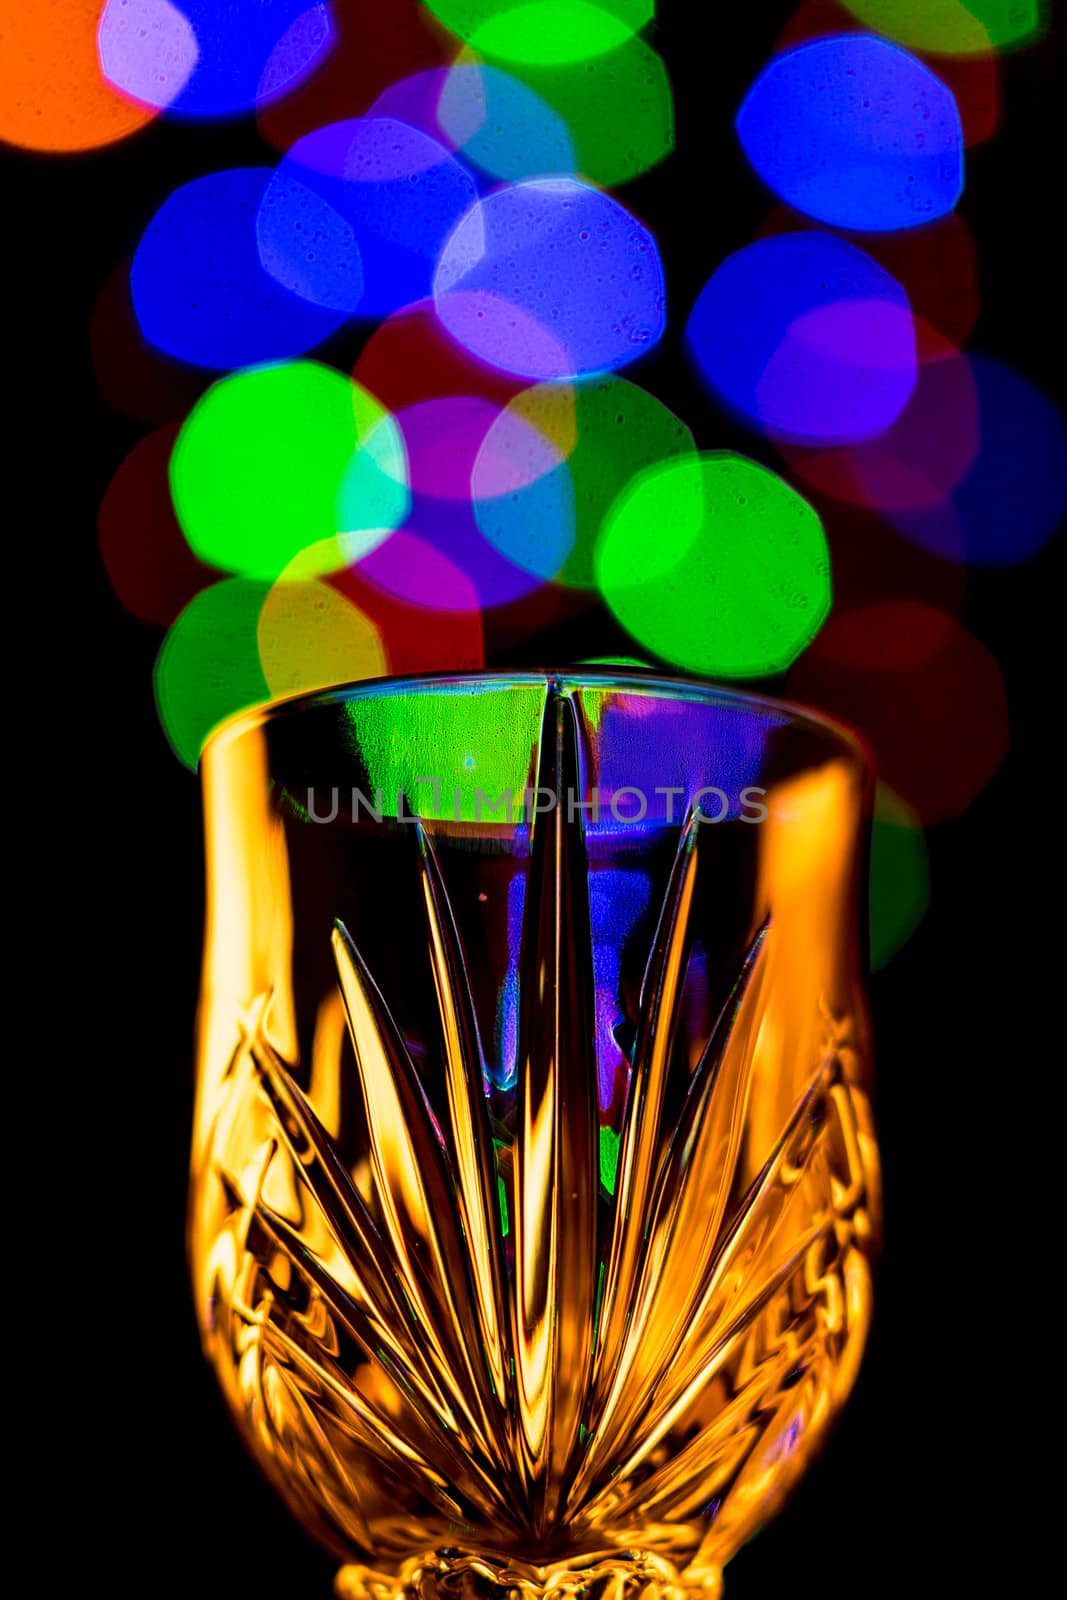 Light bubbles coming out of a wine glass by derejeb